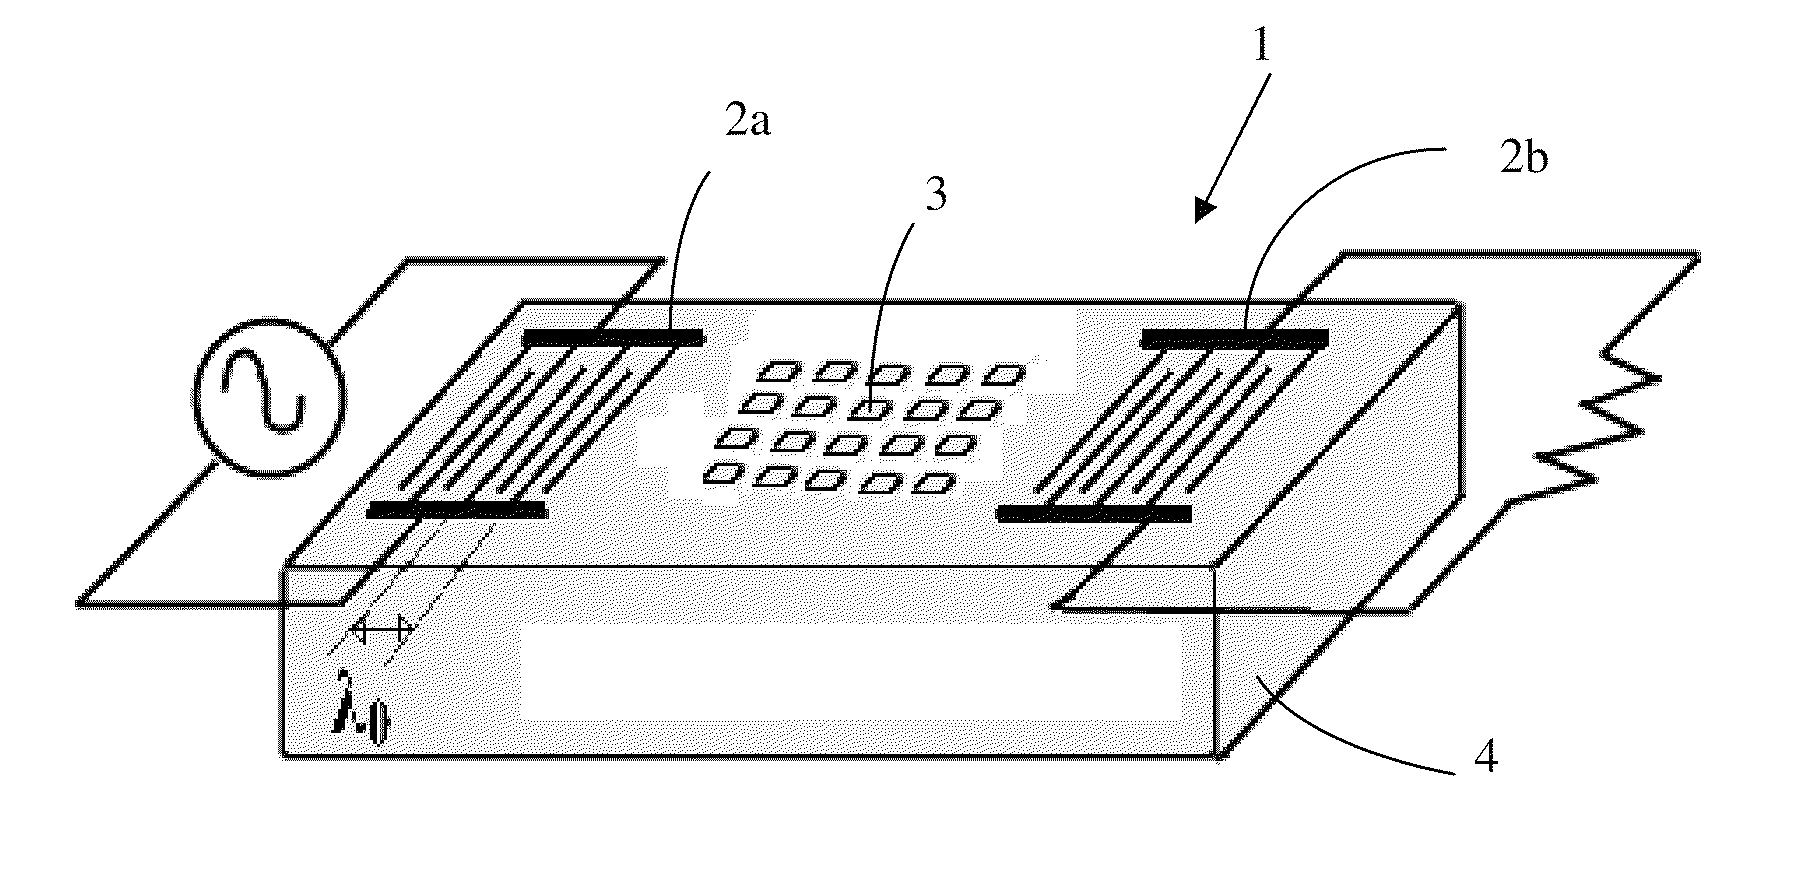 Microcavity enhanced surface acoustic wave devices